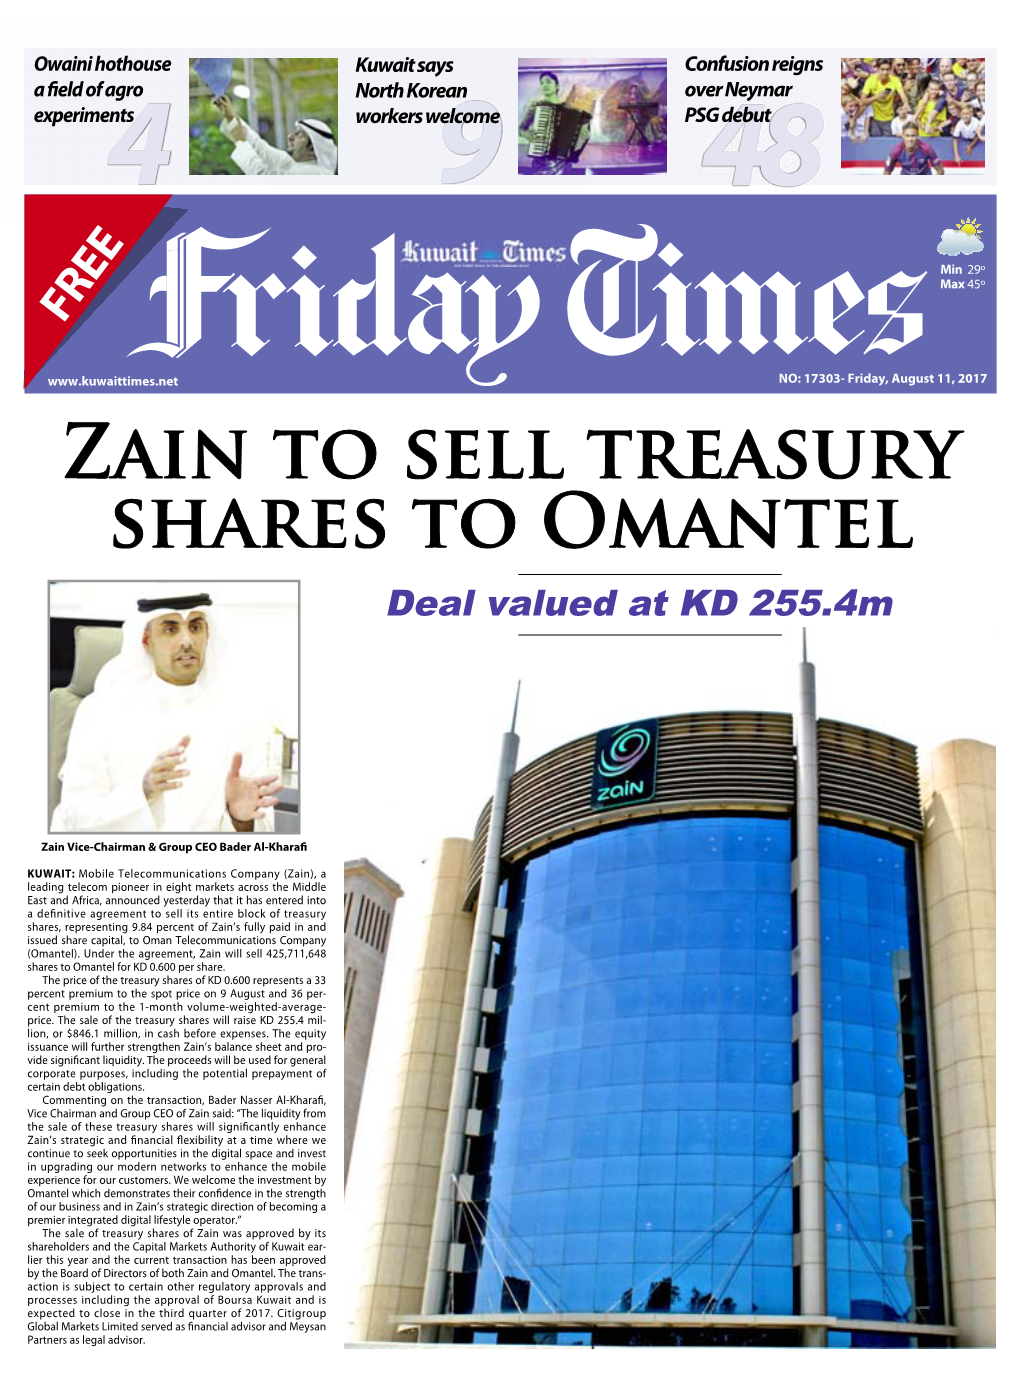 Zain to Sell Treasury Shares to Omantel Deal Valued at KD 255.4M